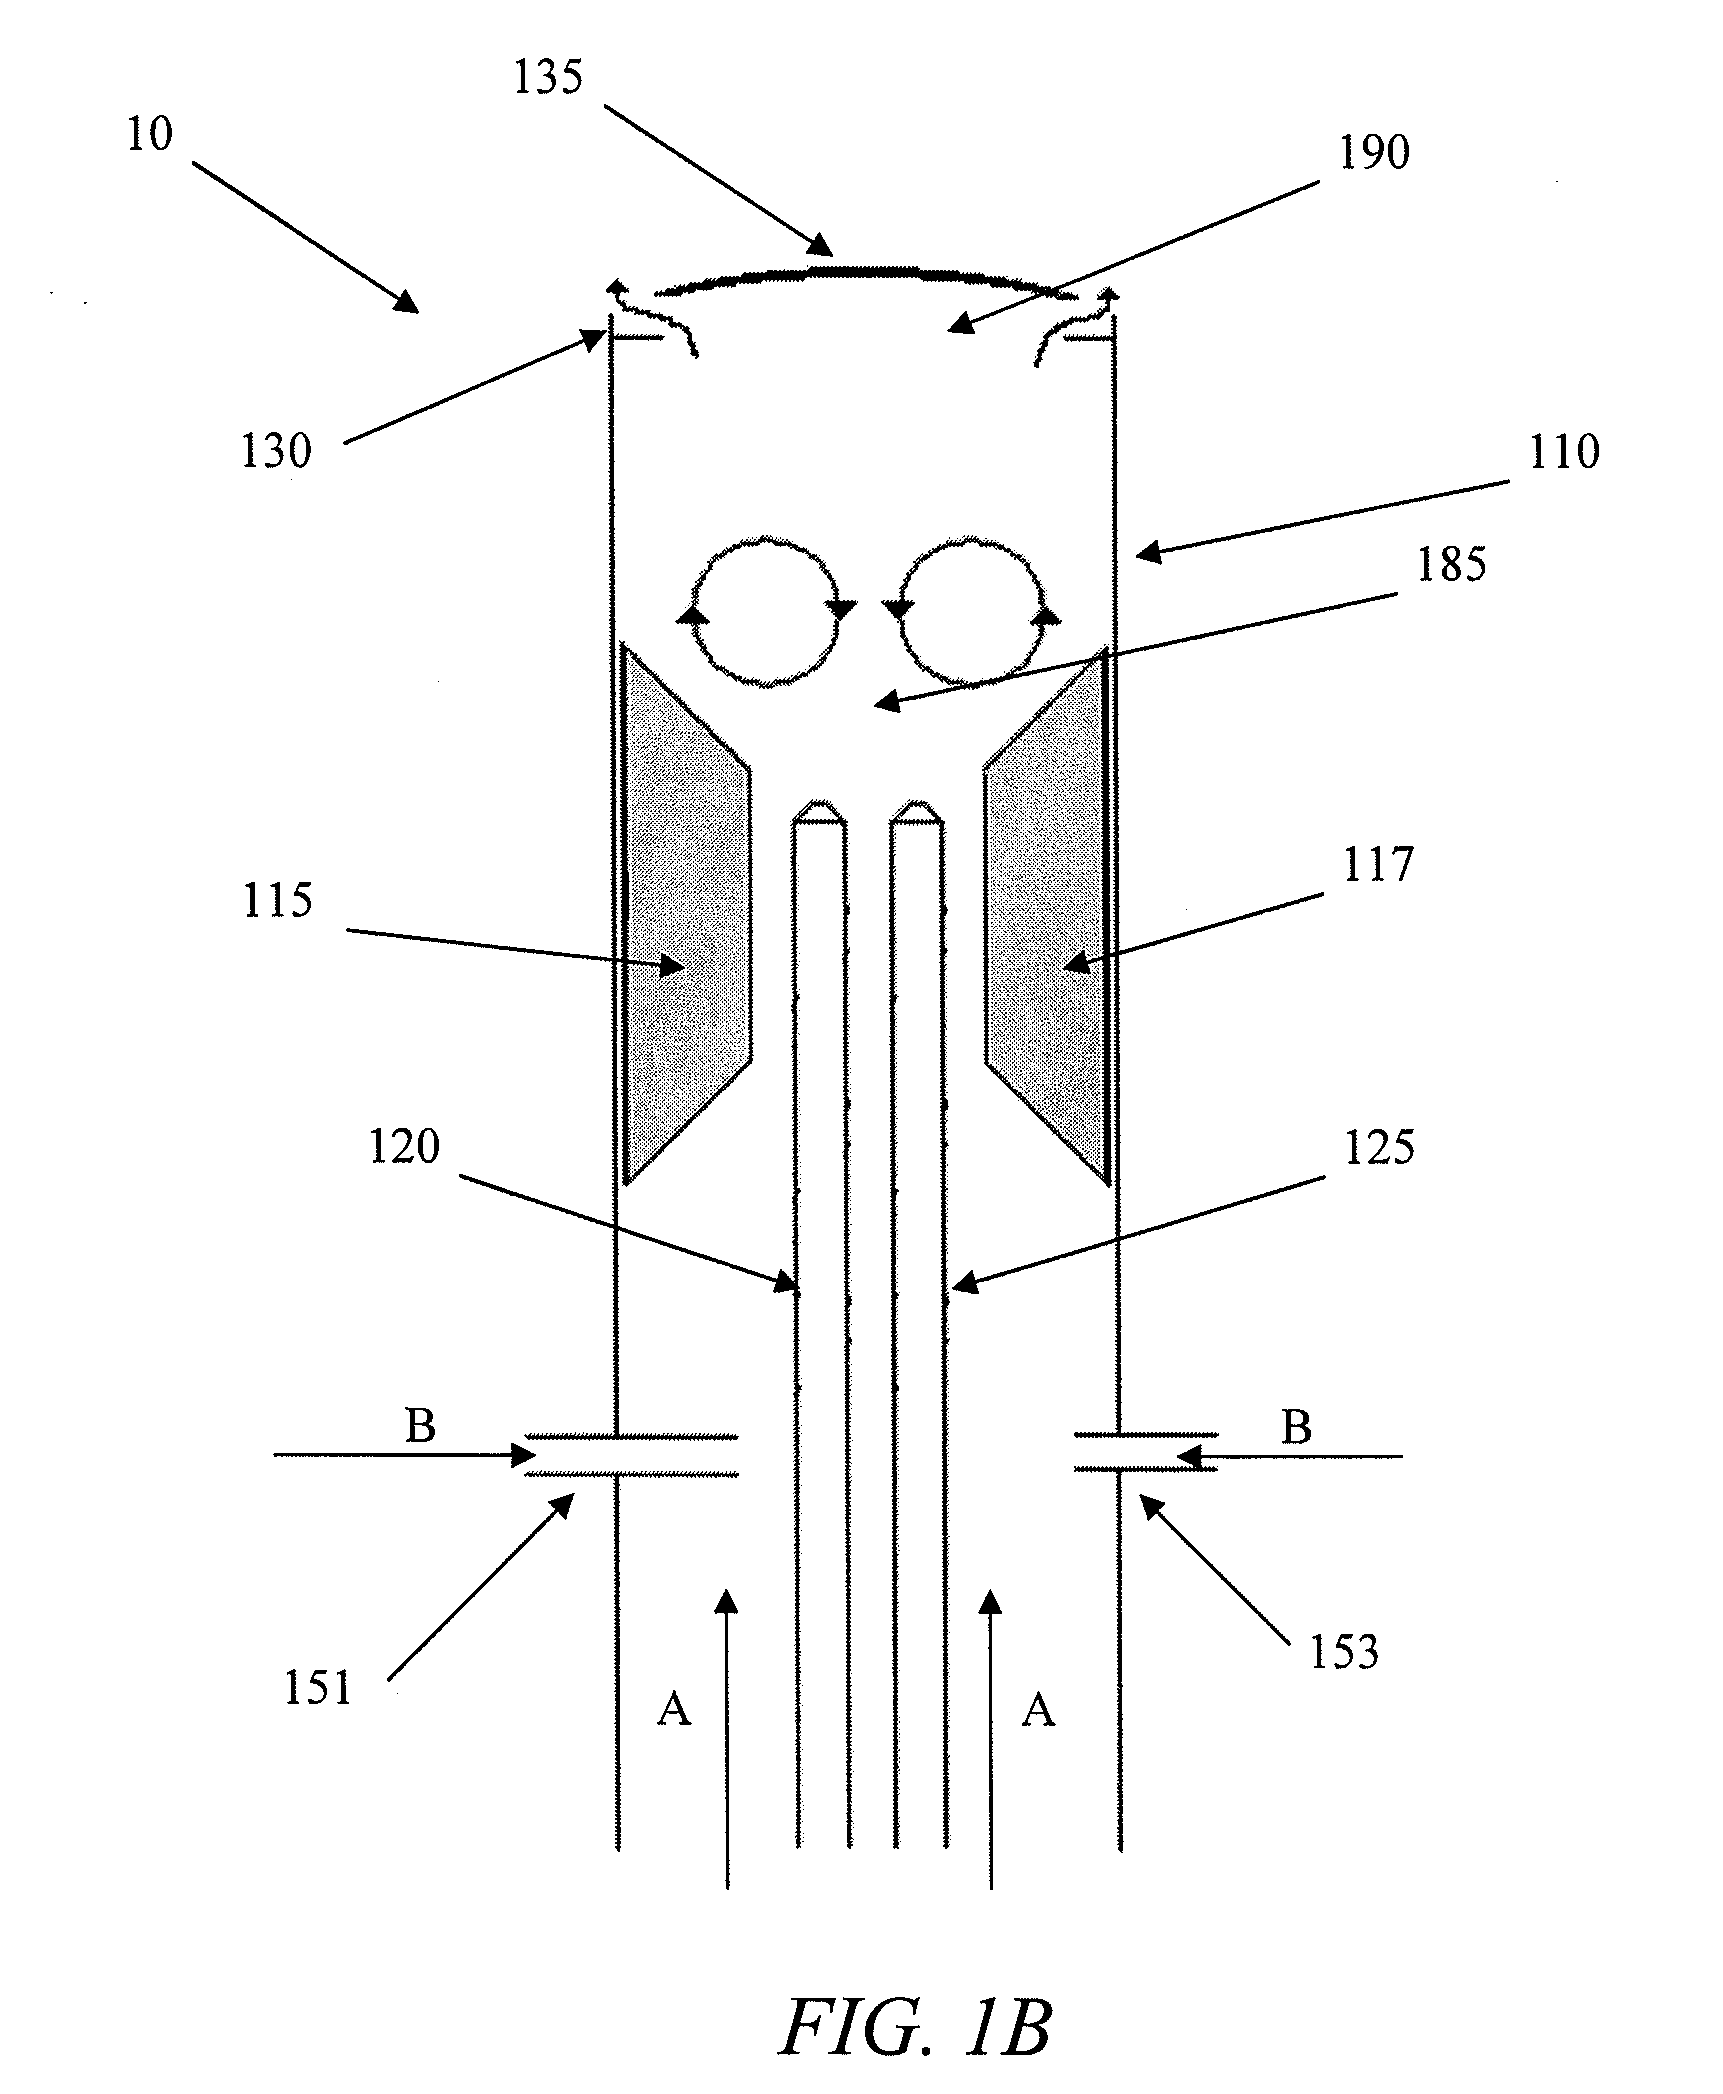 Process for combustion of high viscosity low heating value liquid fuels